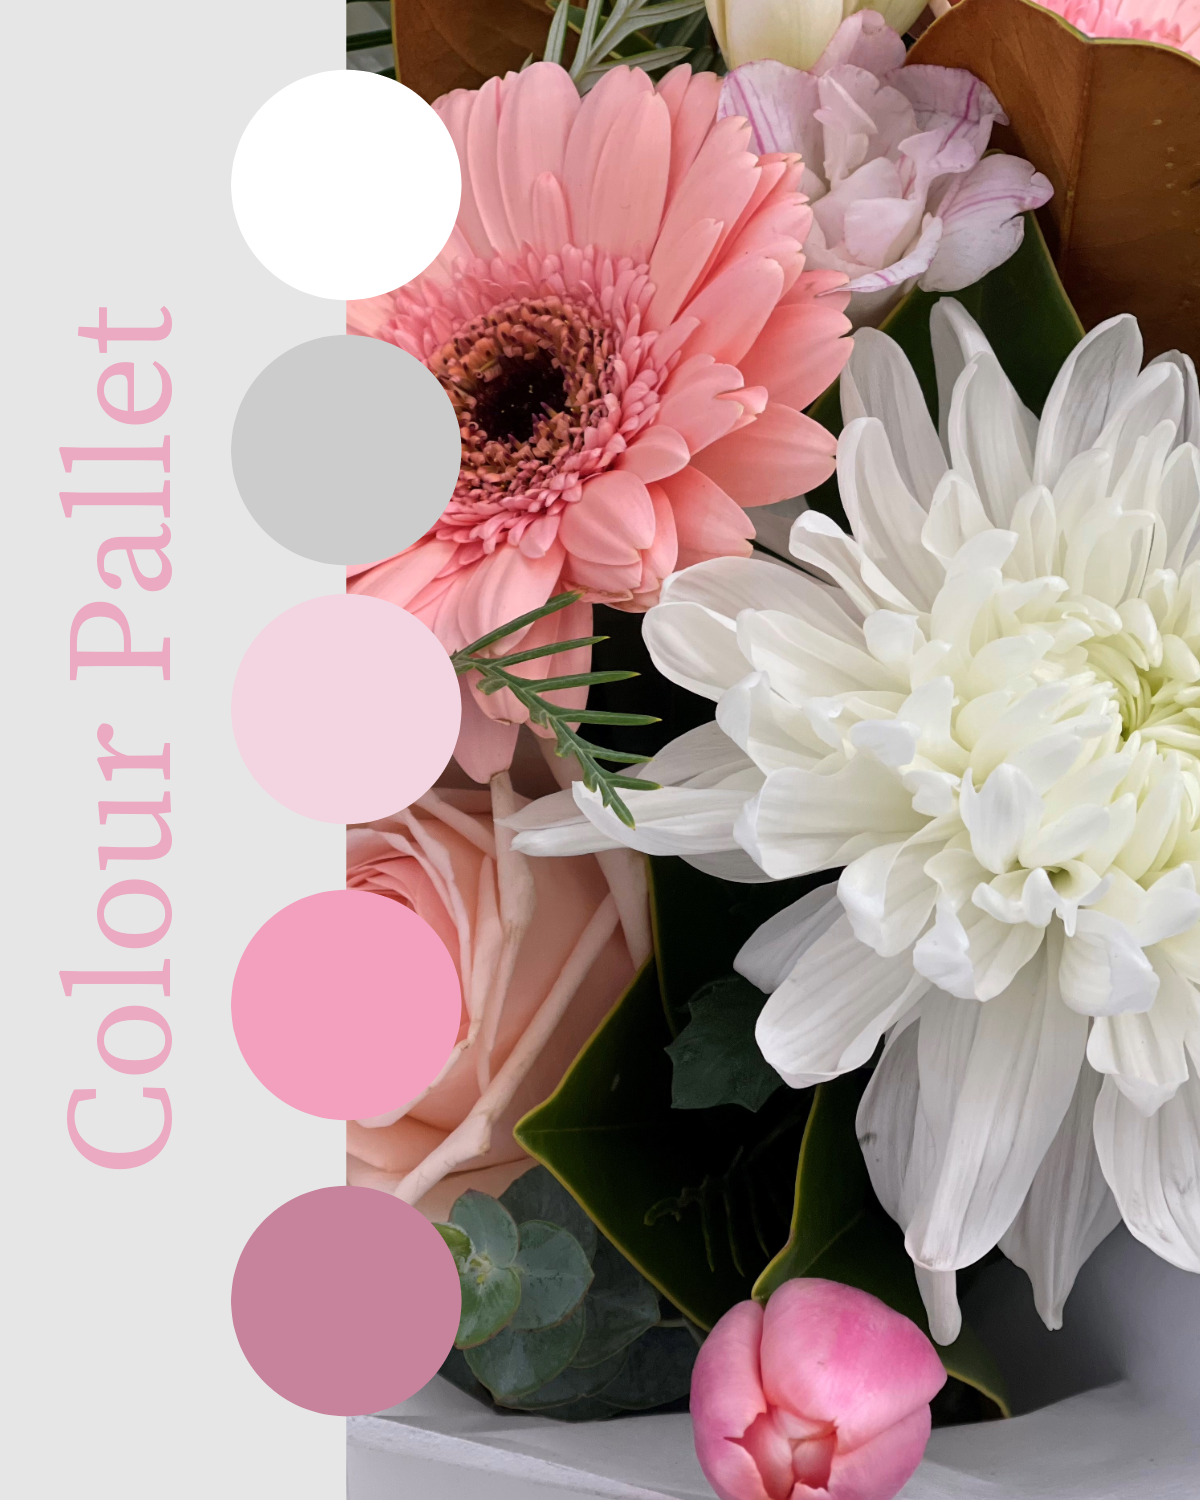 Flowersetc, Floral, Bouquet, Flowers, Gifts, Posy, Posey, Wellington, Lower Hutt, Upper Hutt, Petone, Eastbourne, Bright, Pastel, Florist, Florists, Creative, Flair, custom, bespoke, bunch, bunches, scent, plants, Indoor, wedding, sympathy, funeral, arrangement, floral, seasonal, excellent, elegant, prestige, buttonhole, corsage, gifts for mum, gifts for girlfriend, gifts for friends, pink